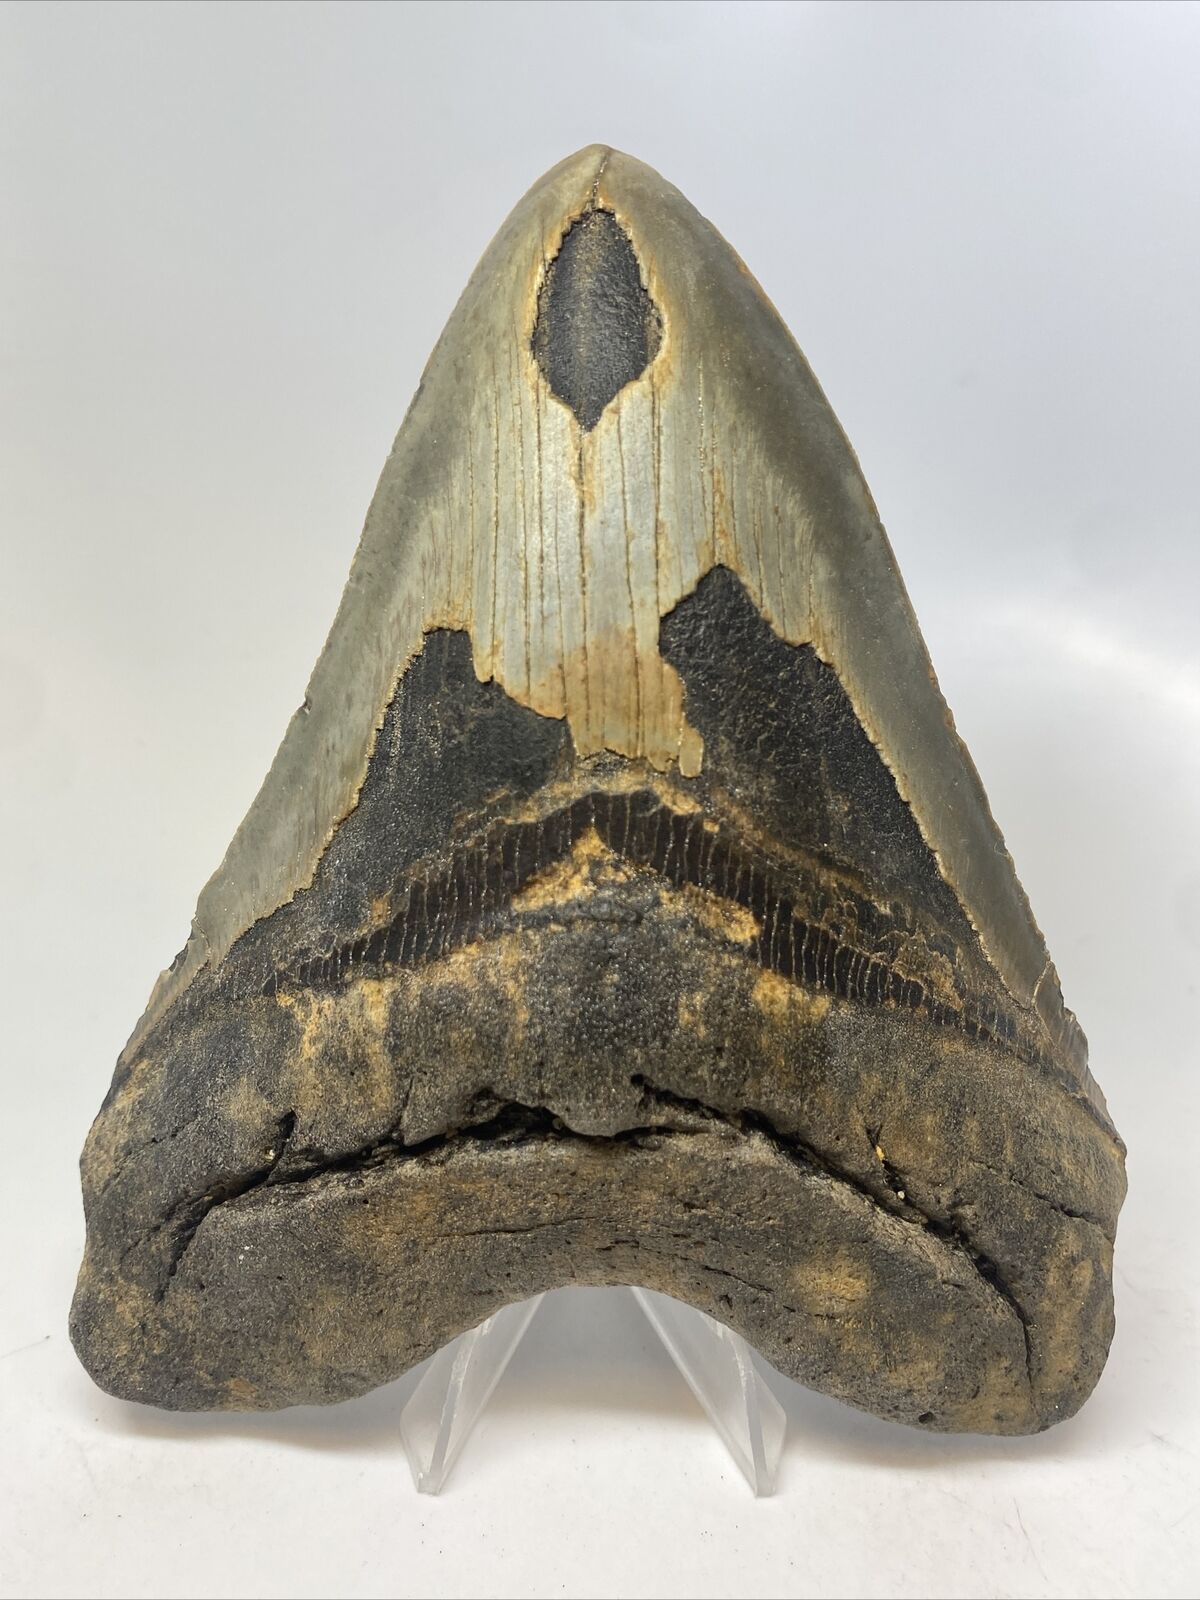 Megalodon Shark Tooth 5.93” Huge - Authentic Fossil - Natural 14758